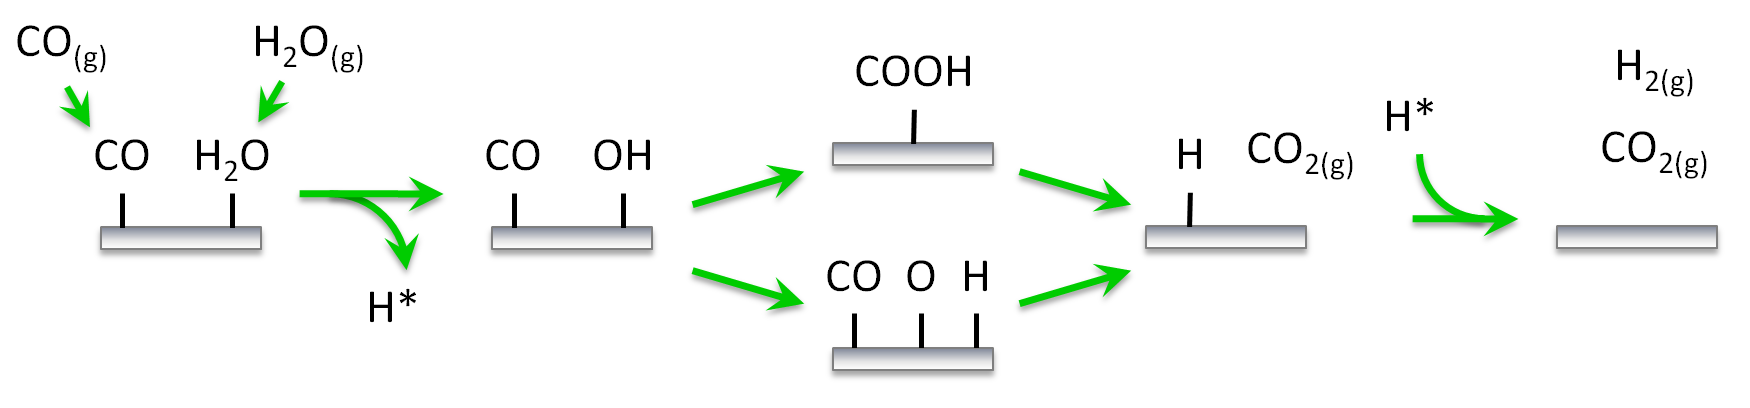 Pathways of the water-gas shift reaction.